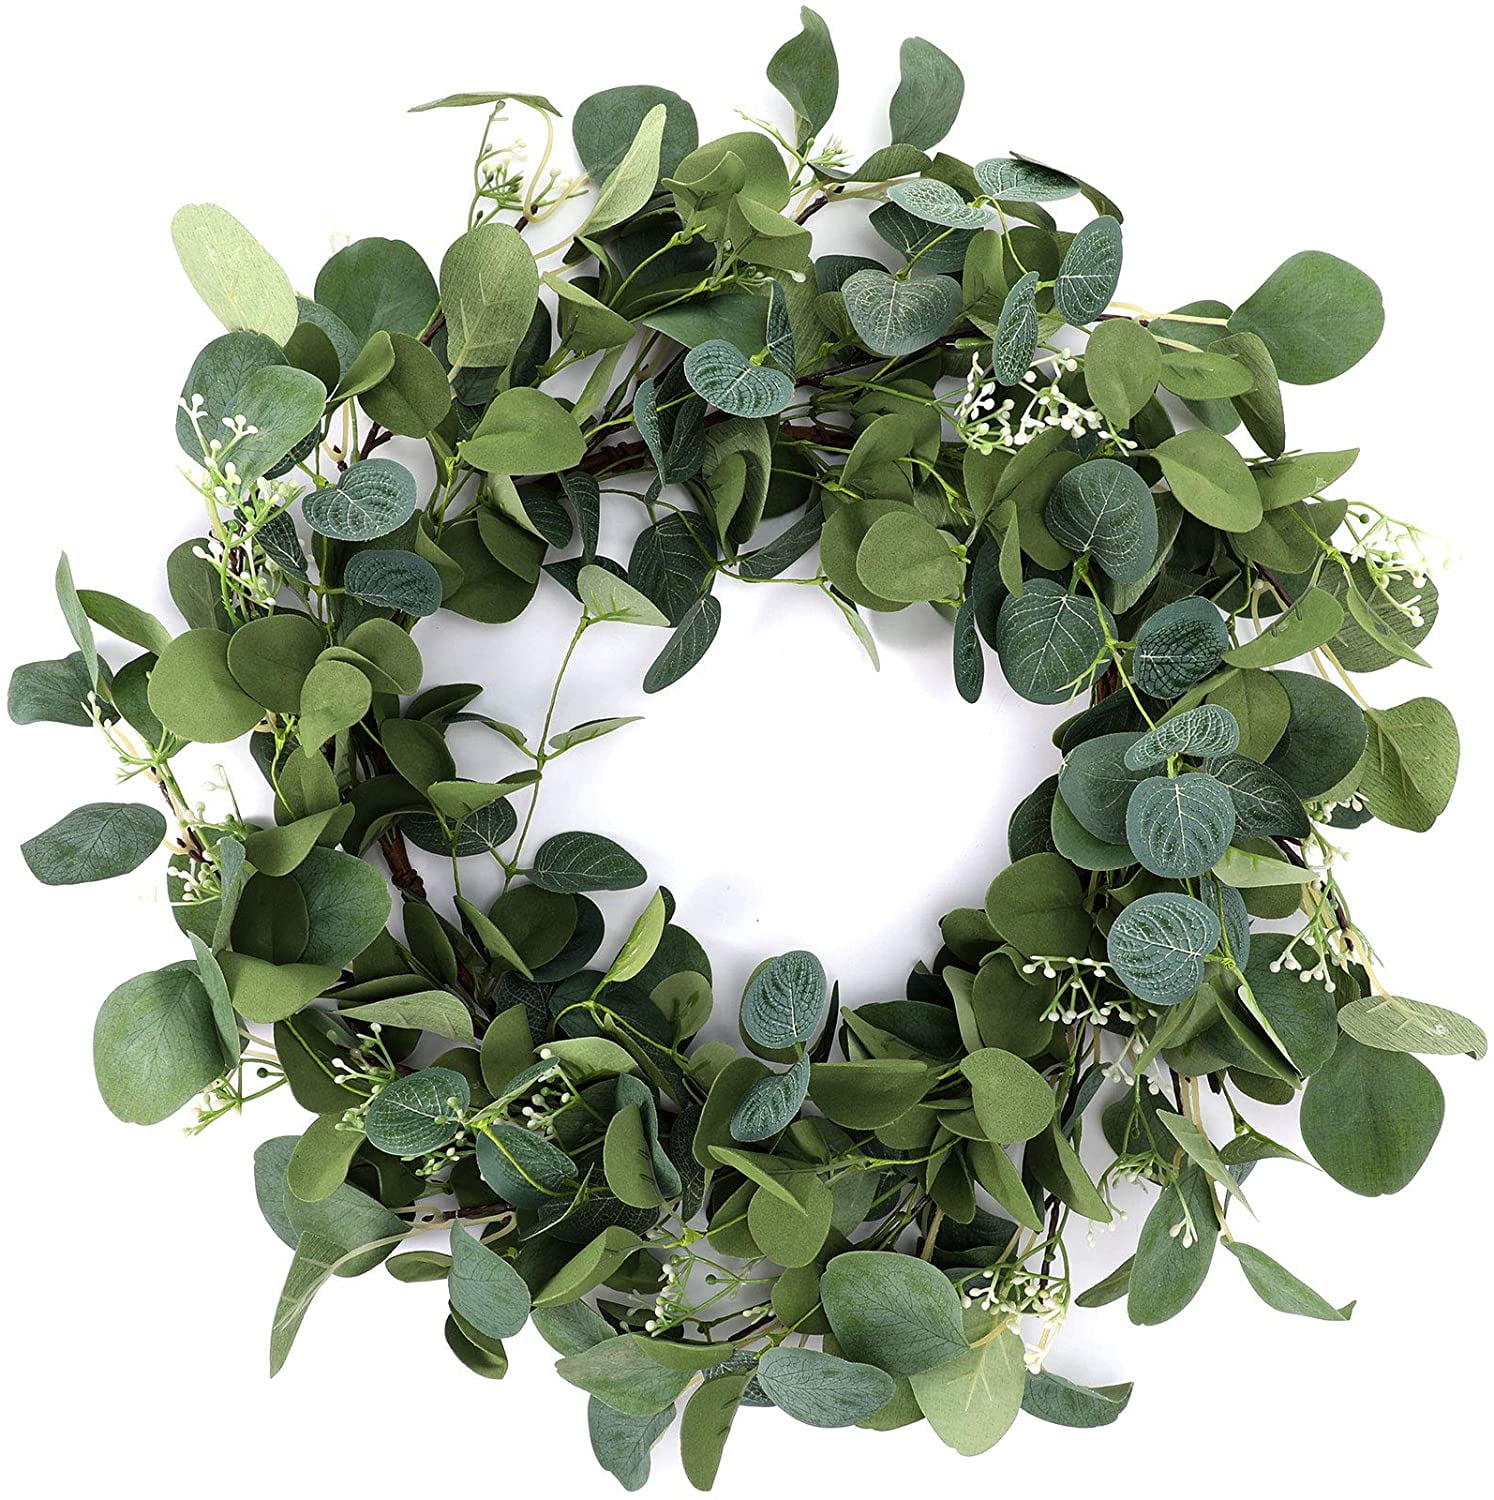 Dolity 2X Artificial Eucalyptus Wreath Green Leaves Front Door Hanging Wall Decoration 55cm 